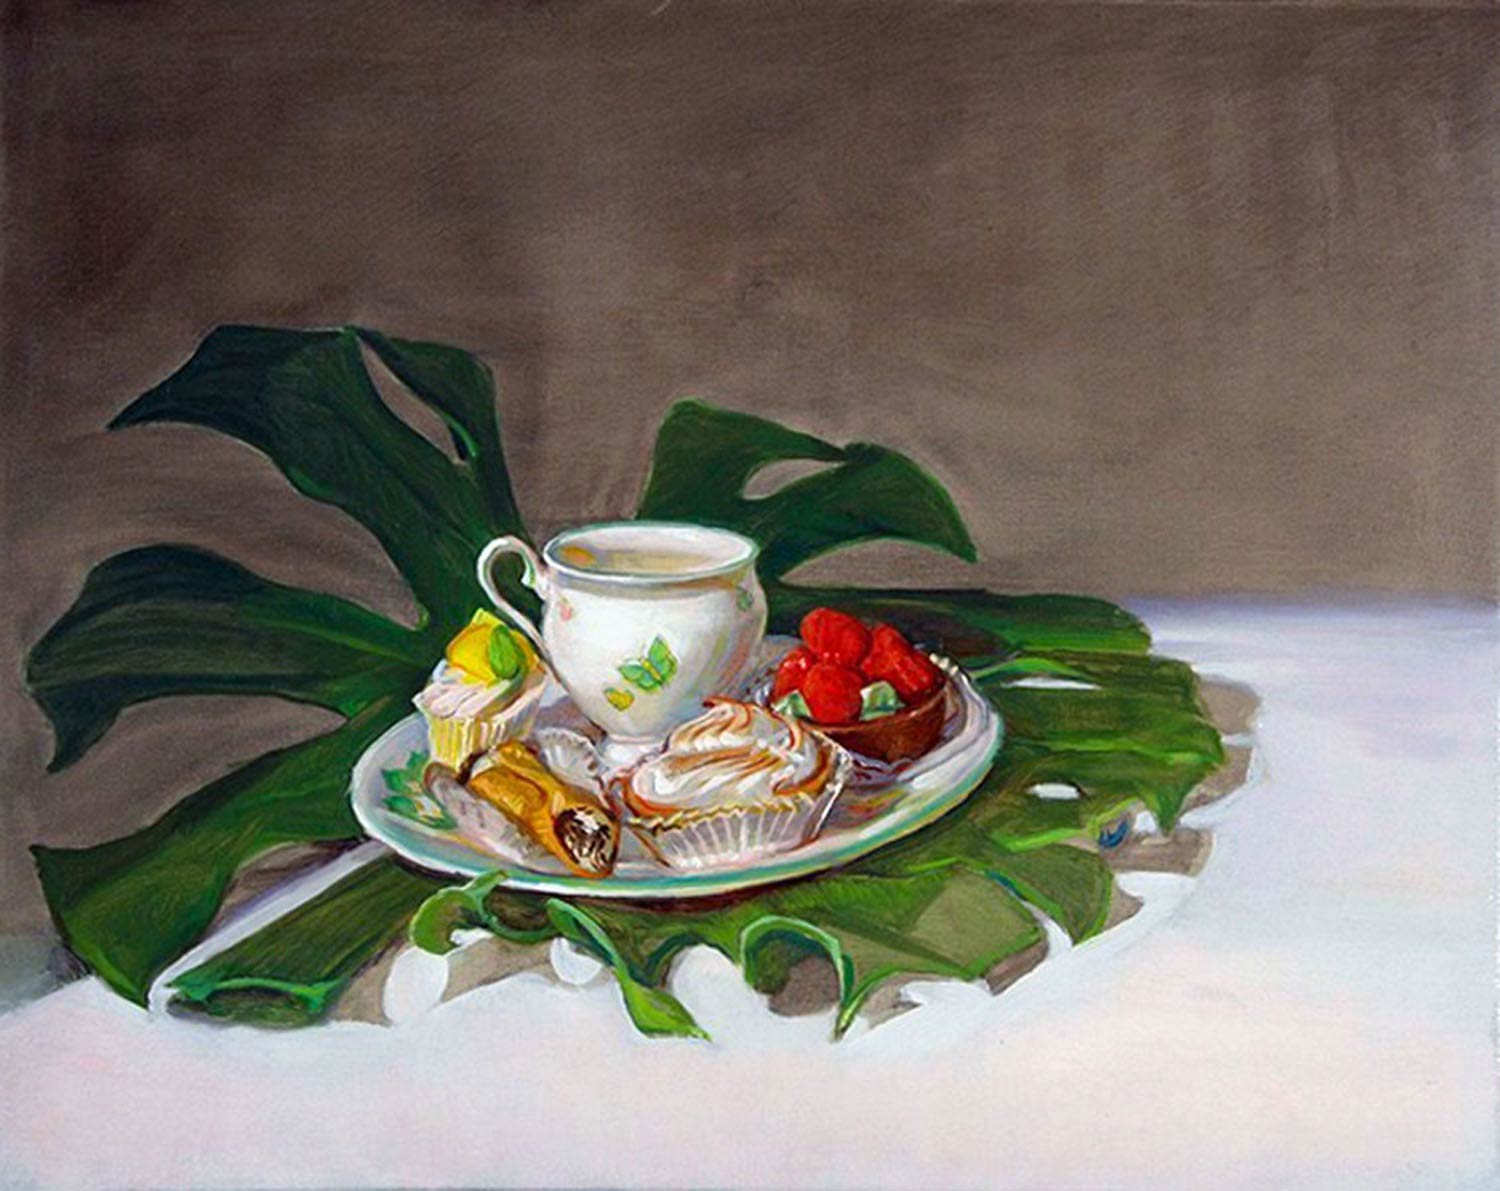 Confections 24 x 30 in oil canvas 2008